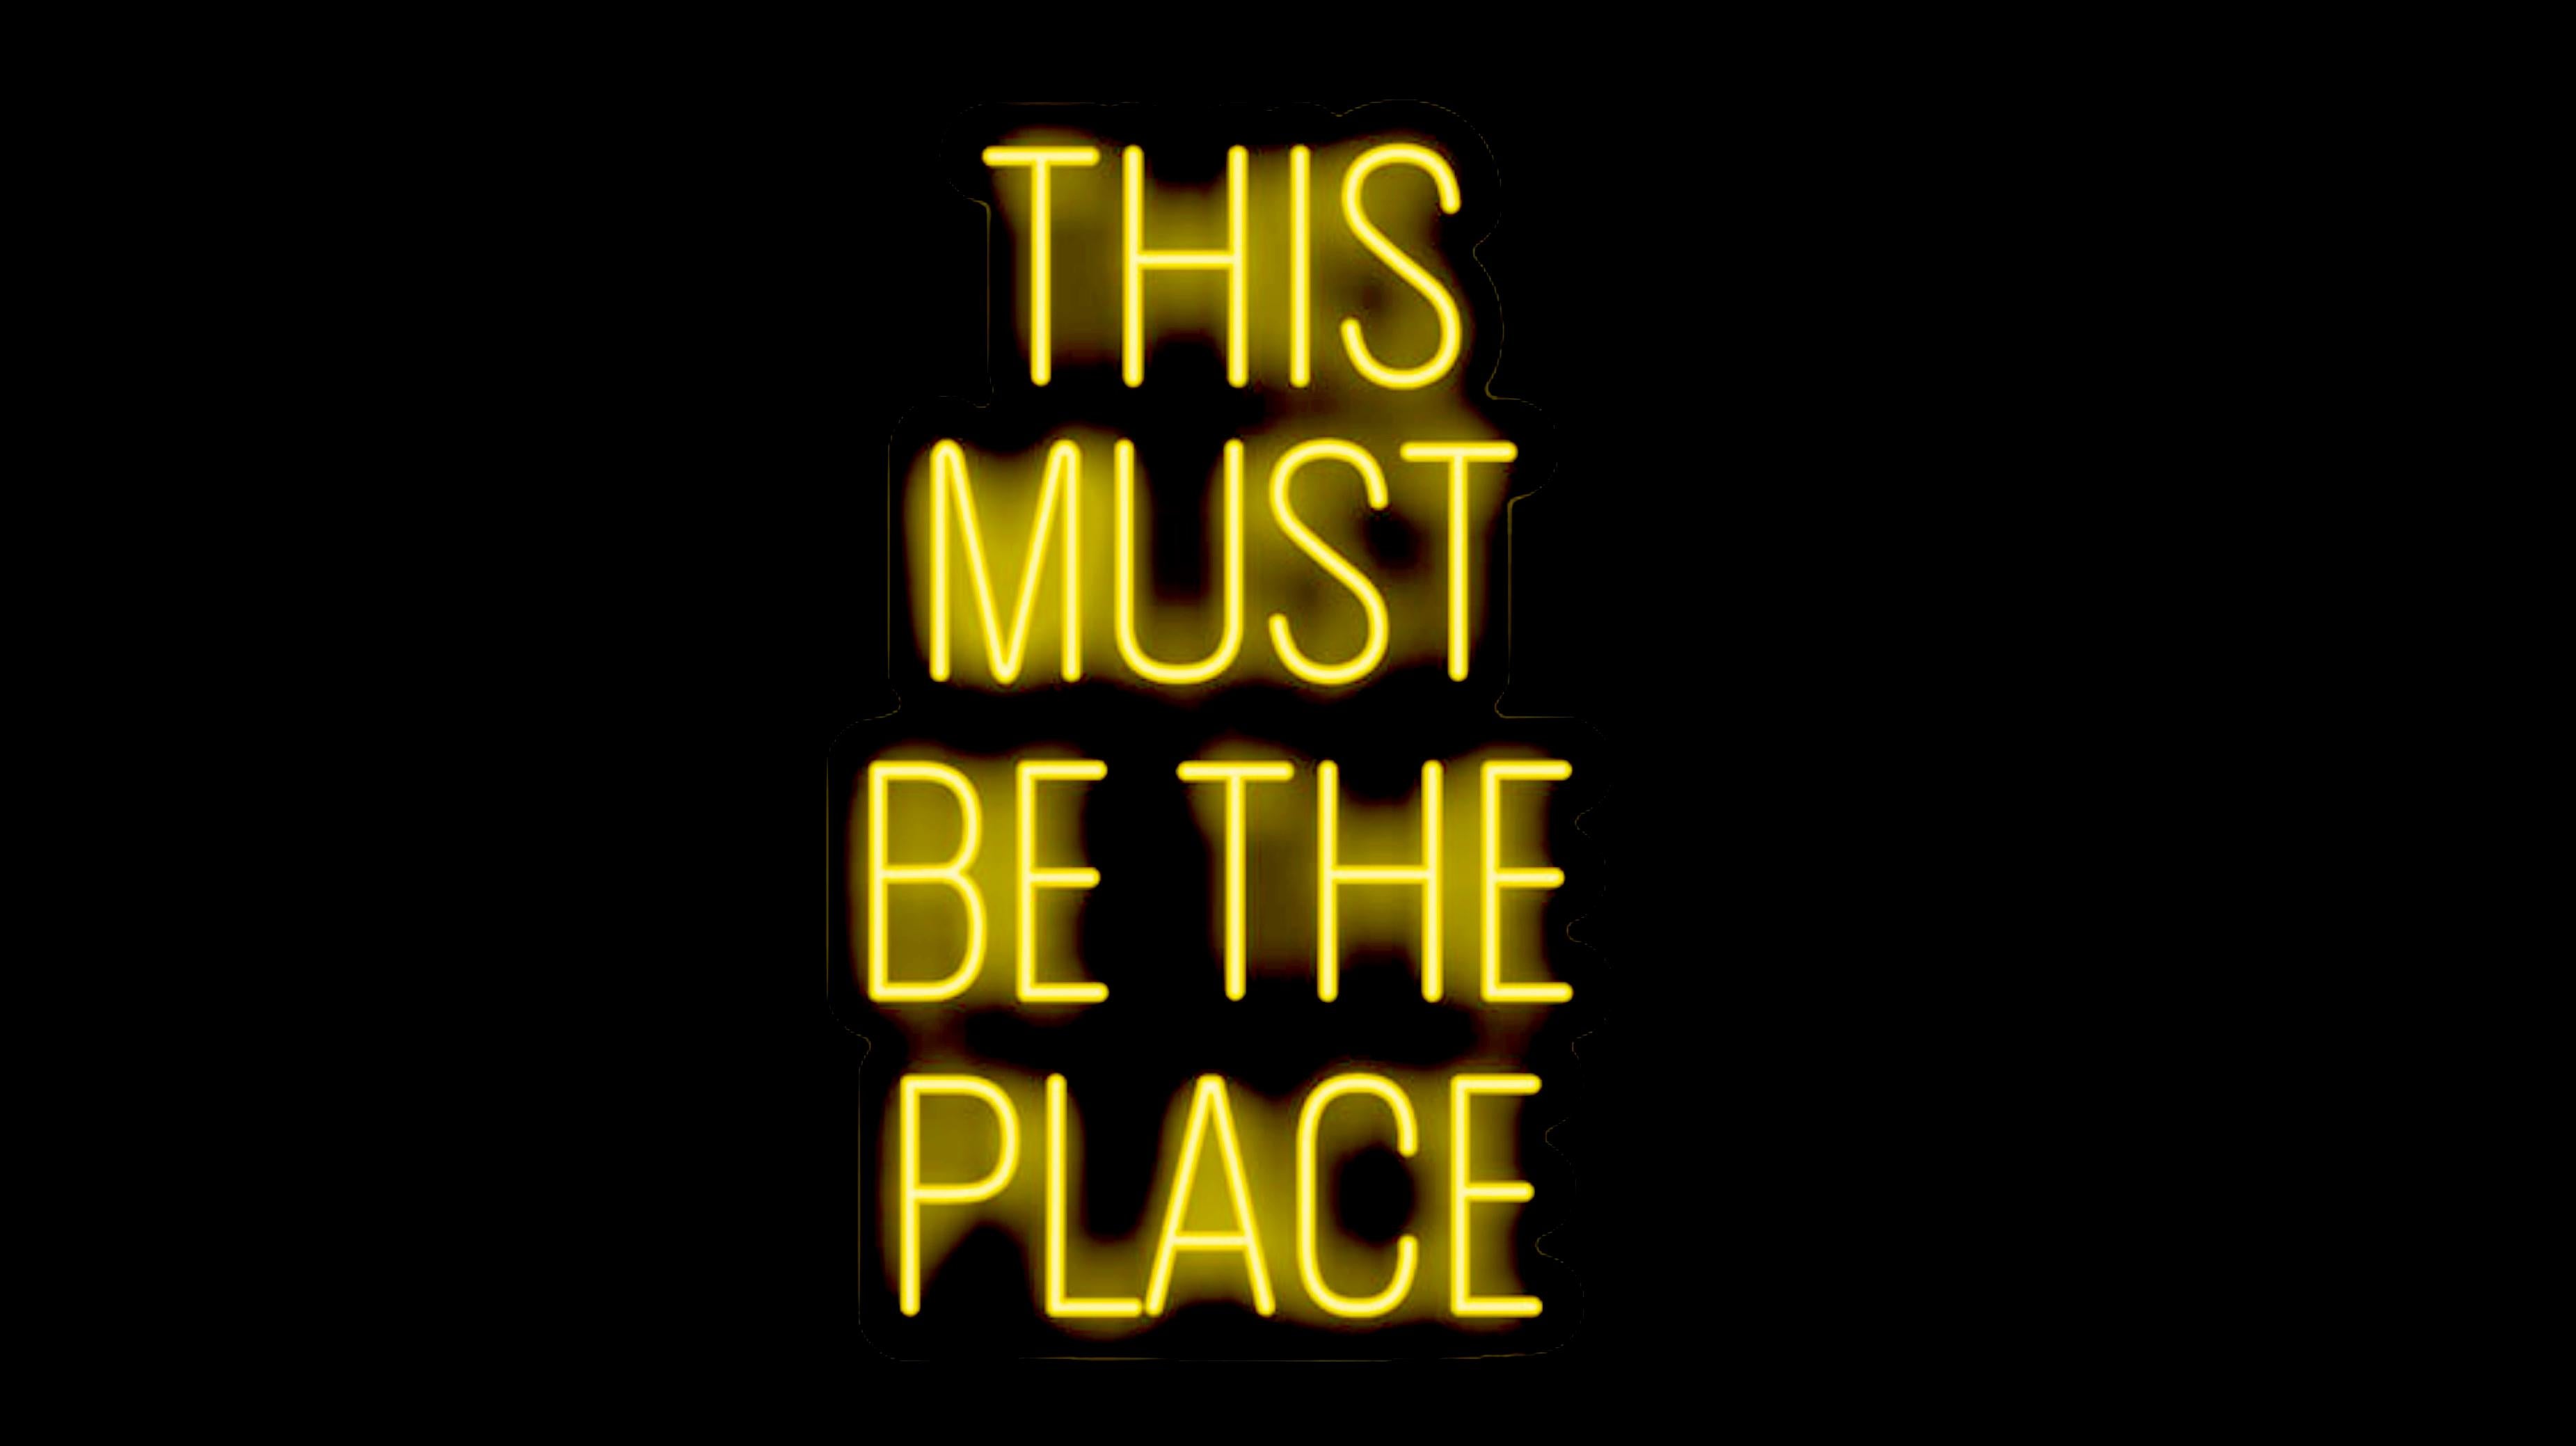 Mary Jo McGonagle Figurative Sculpture - this must be the place - neon art work